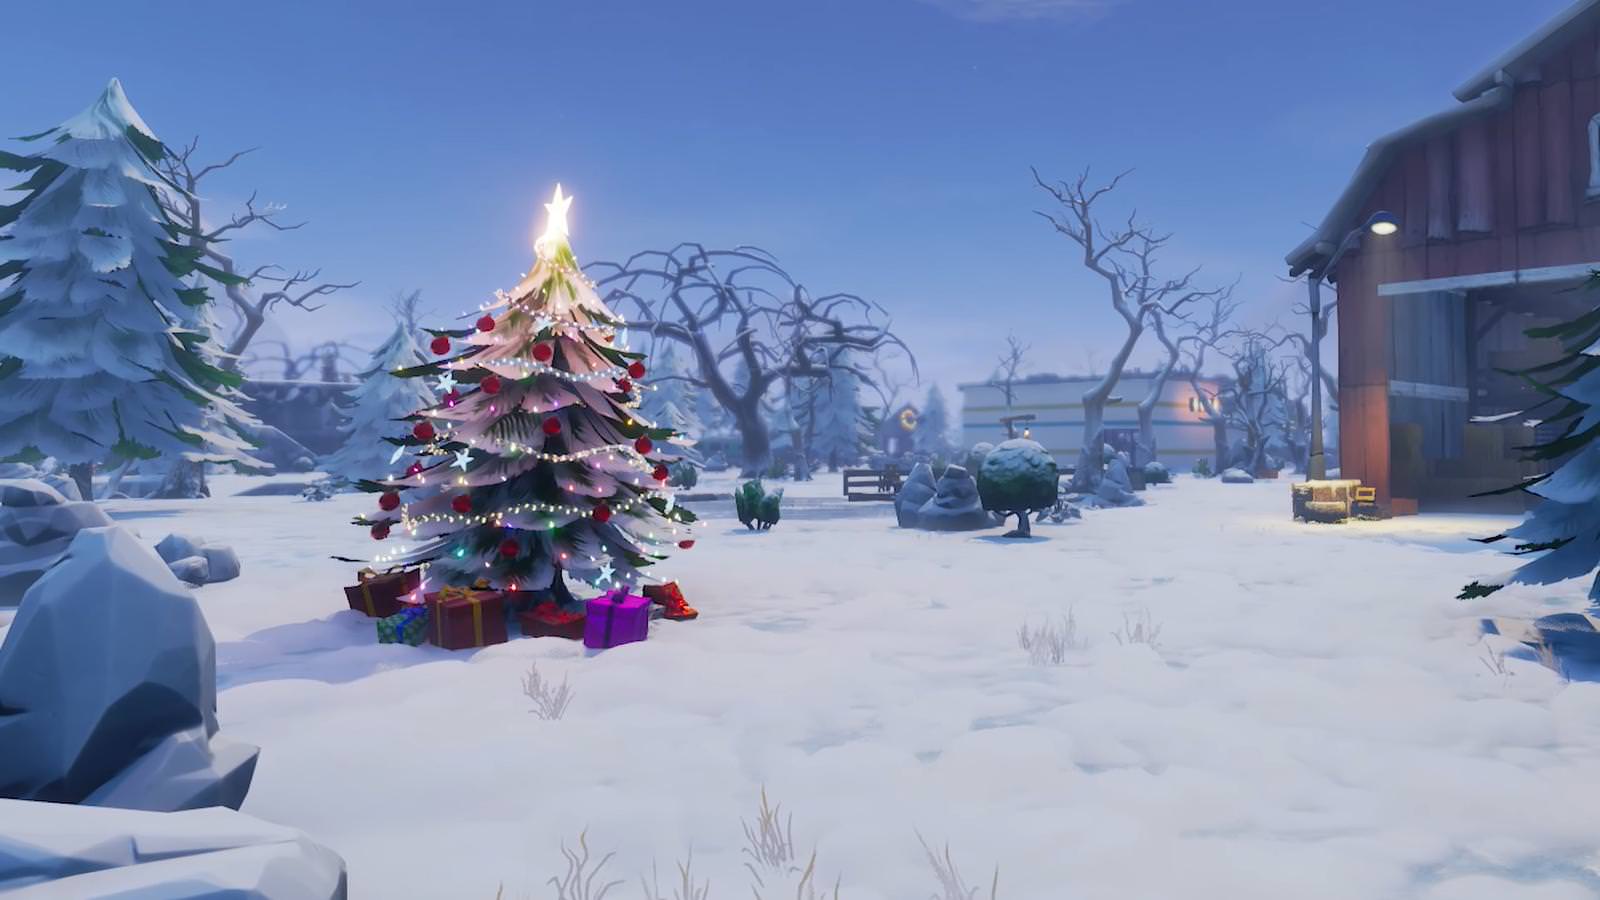 If the Fortnite map isn't snowy at christmas, I'm uninstalling